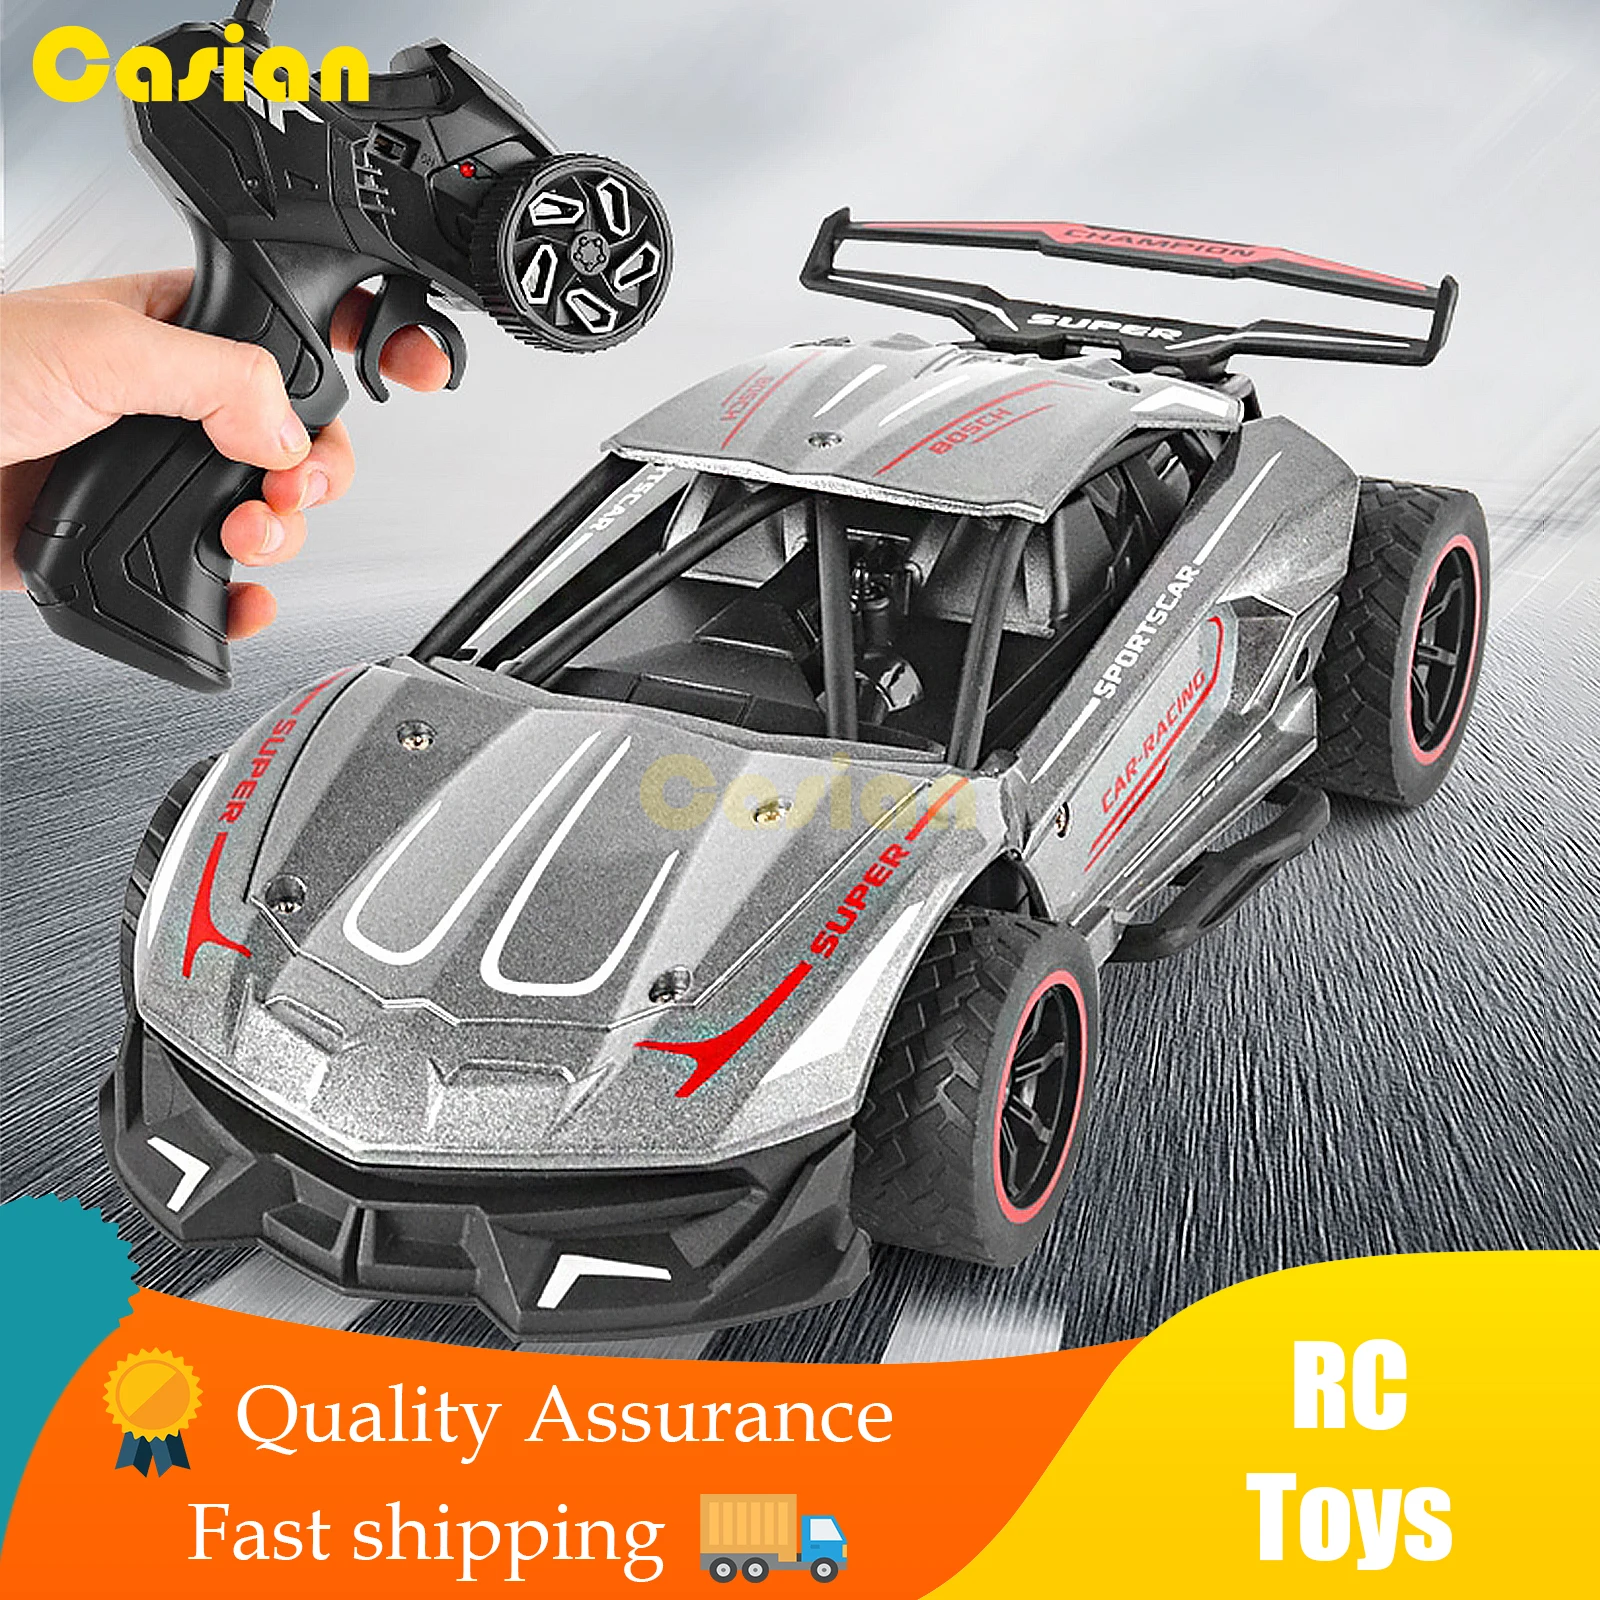 

RC Car 124 4WD Metal RC Drift Racing Car 2.4G Off Road Radio Remote Control Vehicle Electronic Remo Hobby Toys